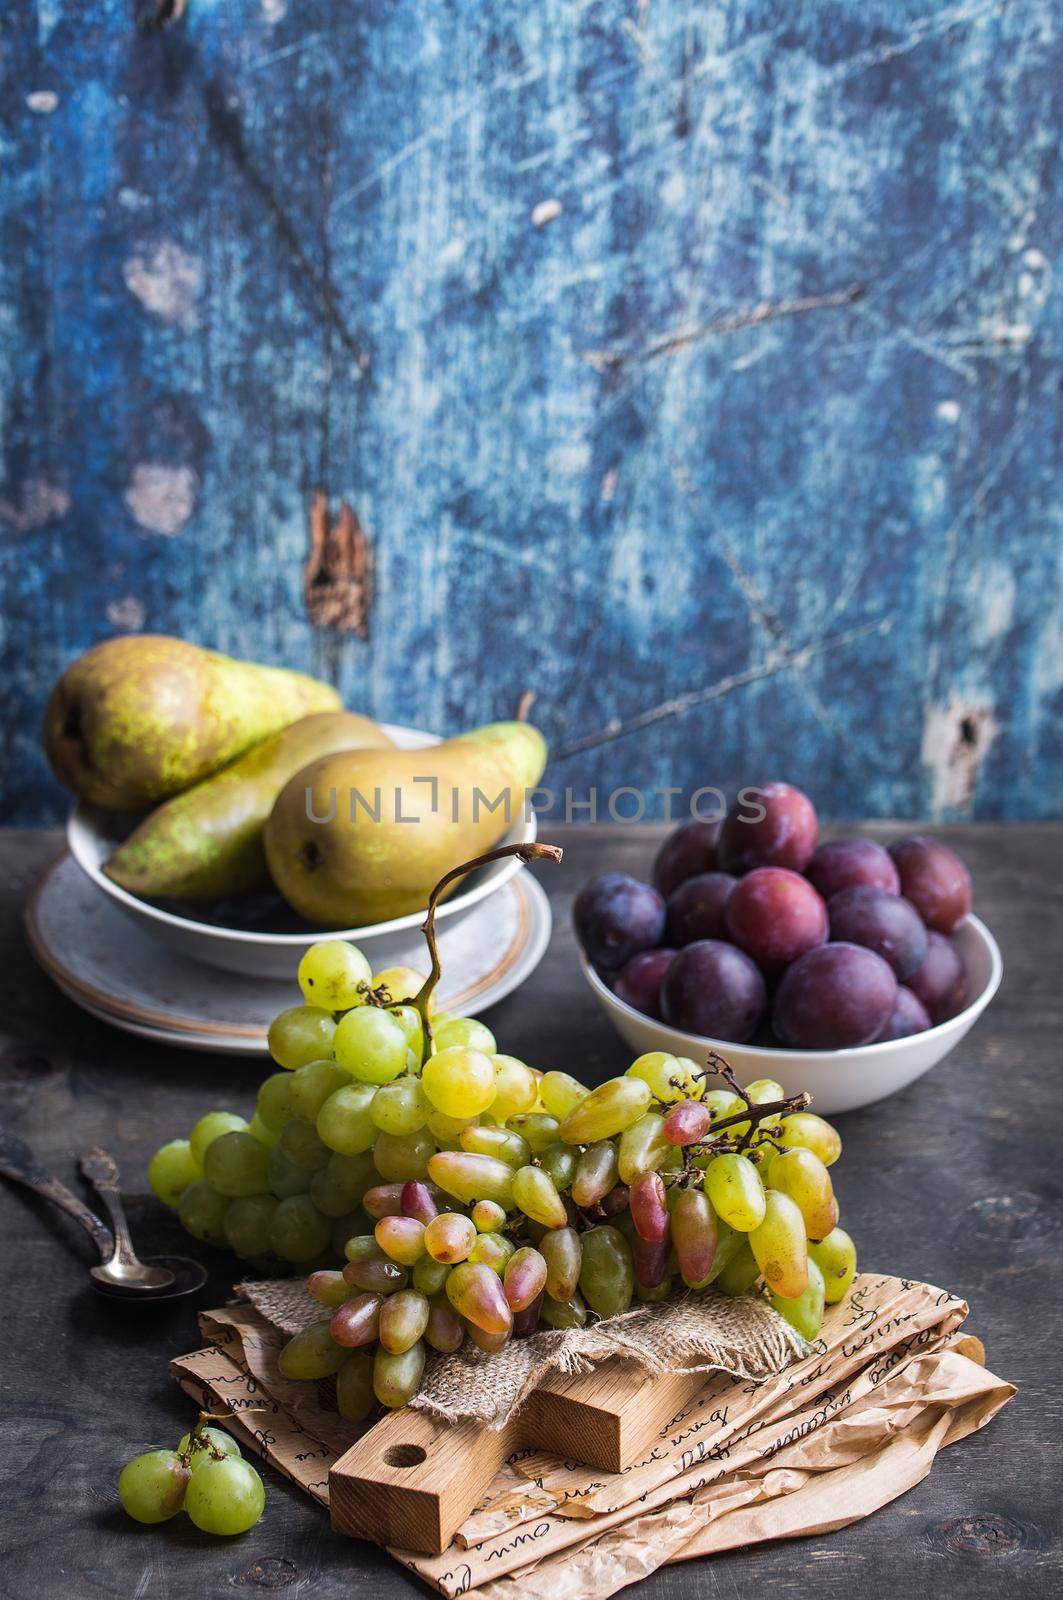 Fresh ripe grapes on wooden cutting board, pears and plums in bowls, wooden rustic background. Fresh juicy organic fruits. Close up. Organic natural fruits. Autumn/fall setting. Harvest/crop/garden